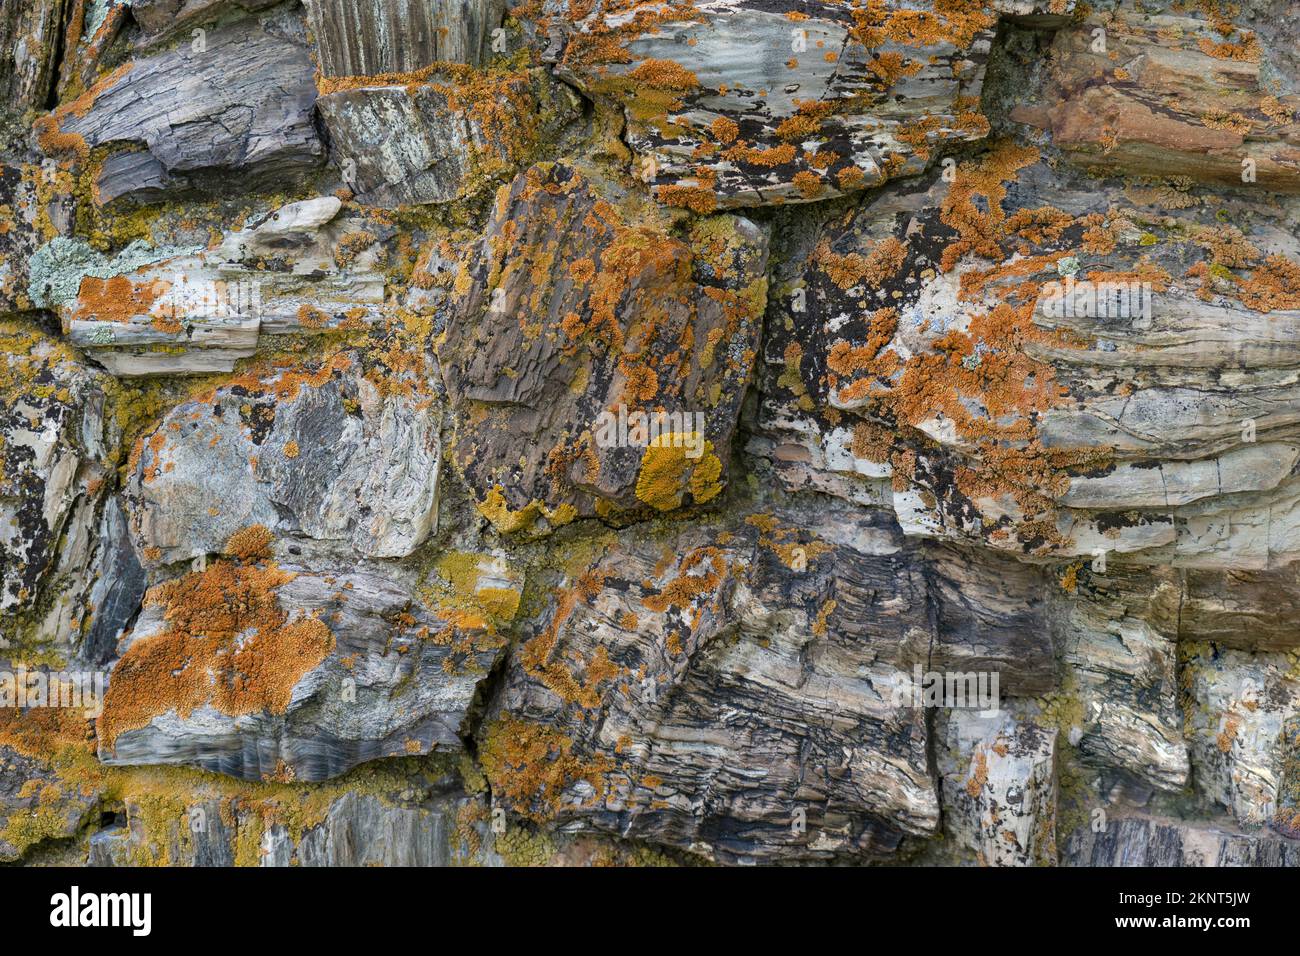 Petrified old wood rock has been made into stone wall structure with living moss lichen matter. Here is a closeup showing rough texture rock cemented. Stock Photo